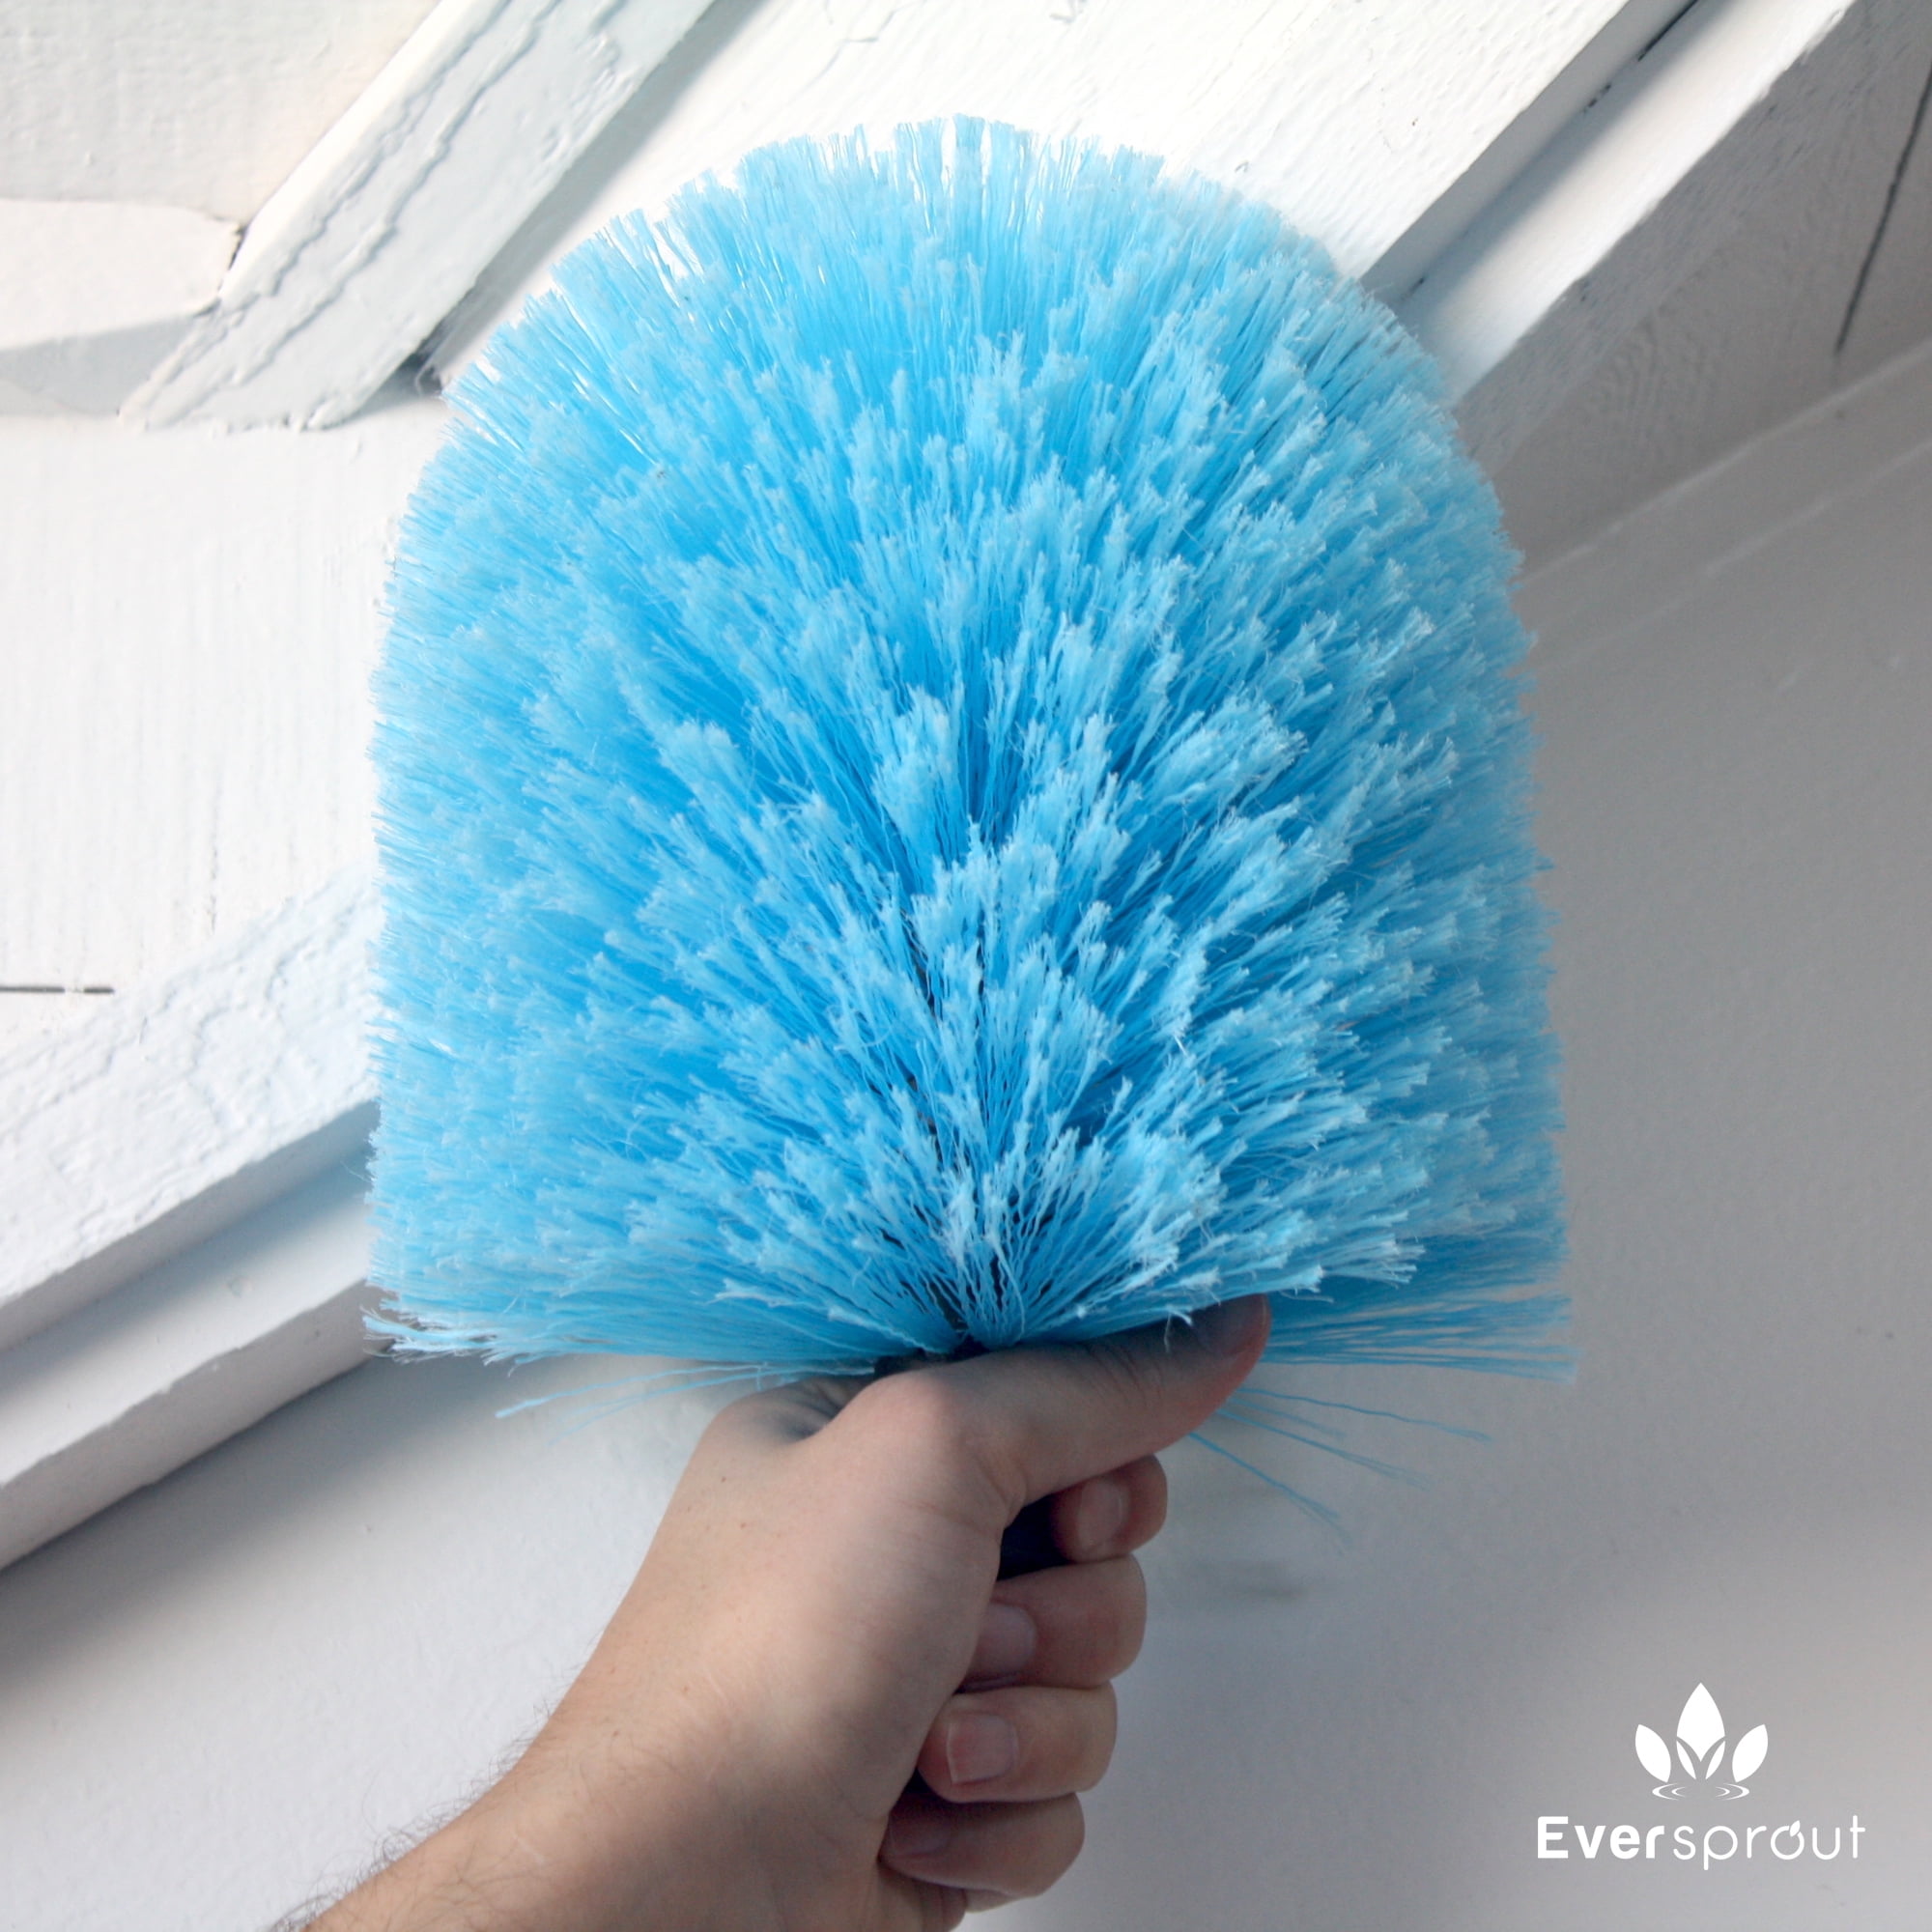 Pack of 1 Flexible Microfiber Feather Duster17-inch Brush Head 17 Inch 